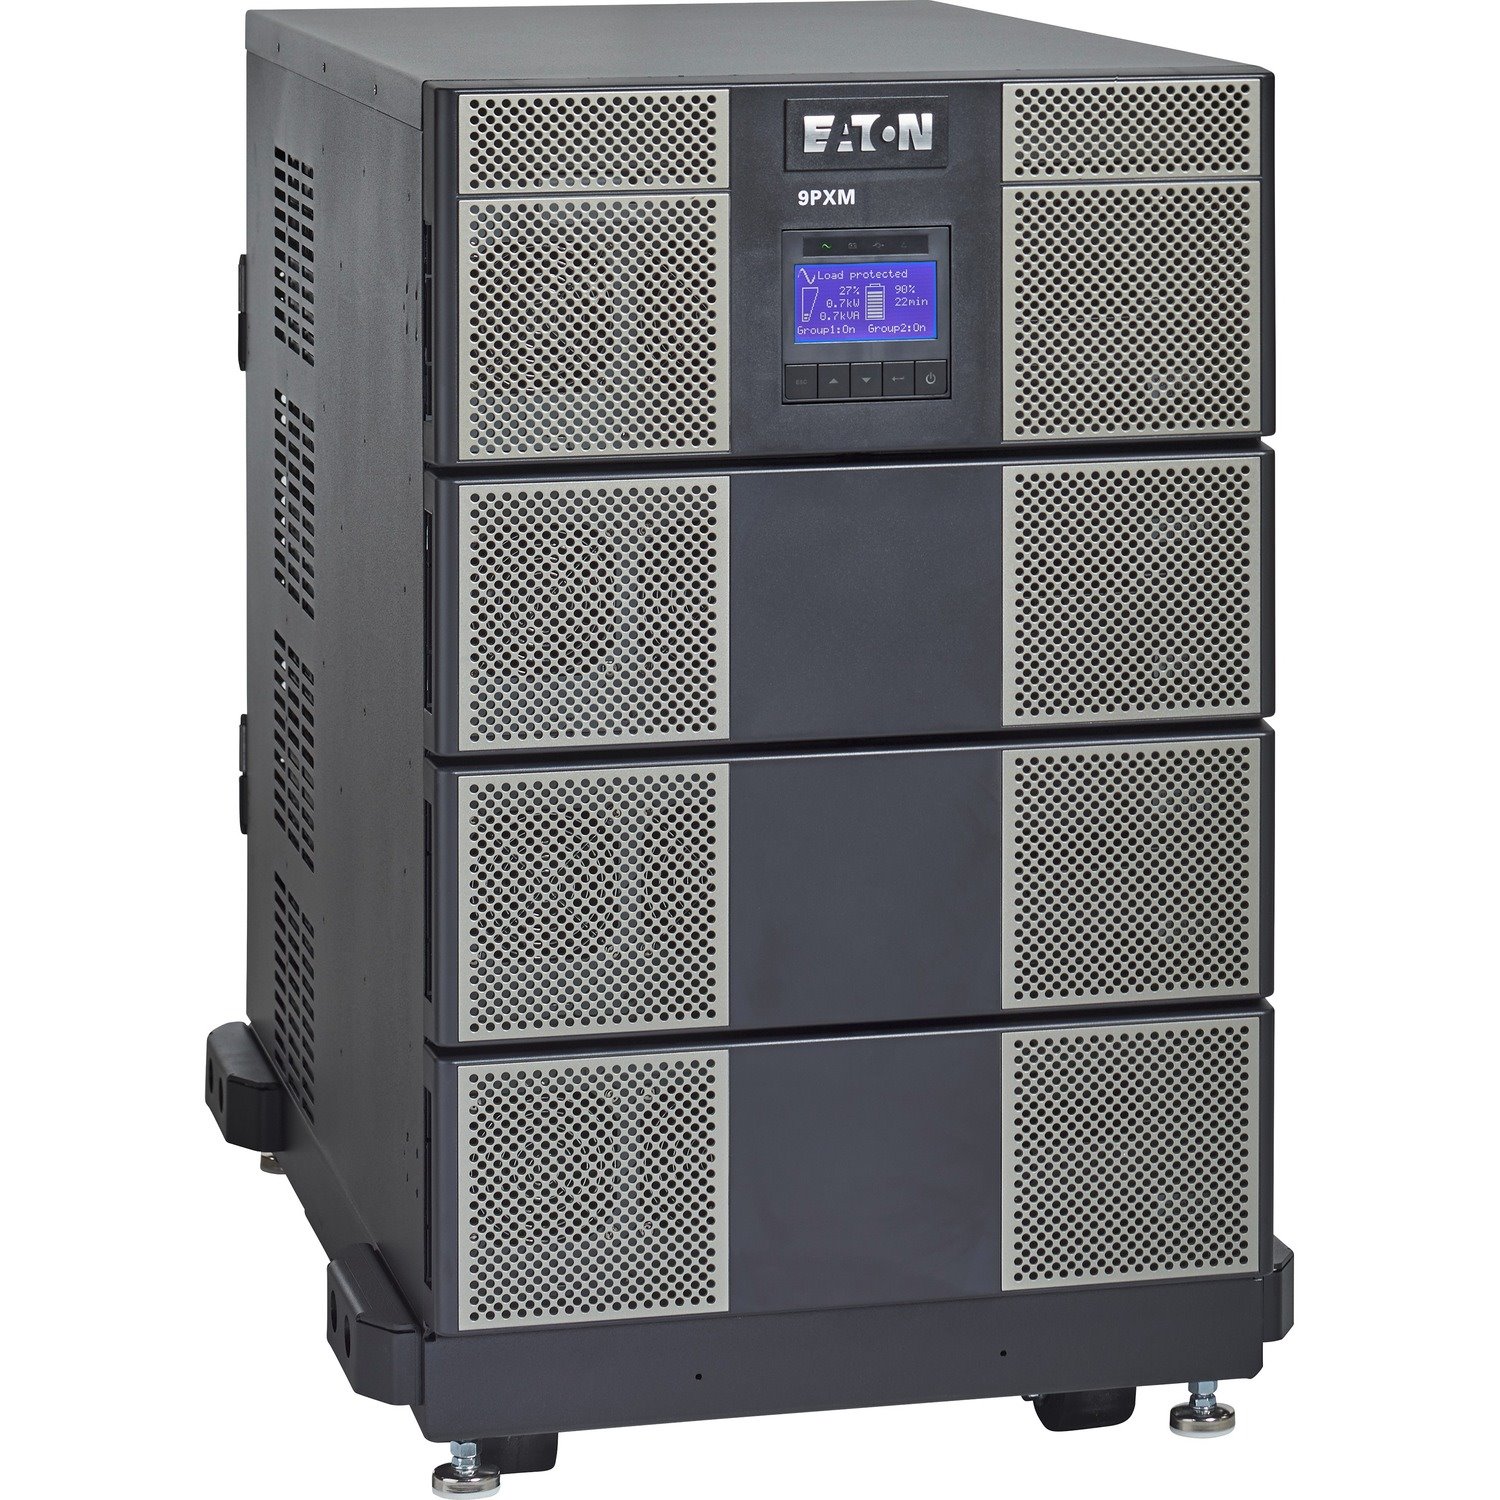 Eaton 9PXM 4000VA 3600W 208-240V Modular Scalable Online Double-Conversion UPS, Hardwired Input, 4x 5-20R, 2 L6-30R Outlets, Cybersecure Network Card Included, 14U, TAA - Battery Backup